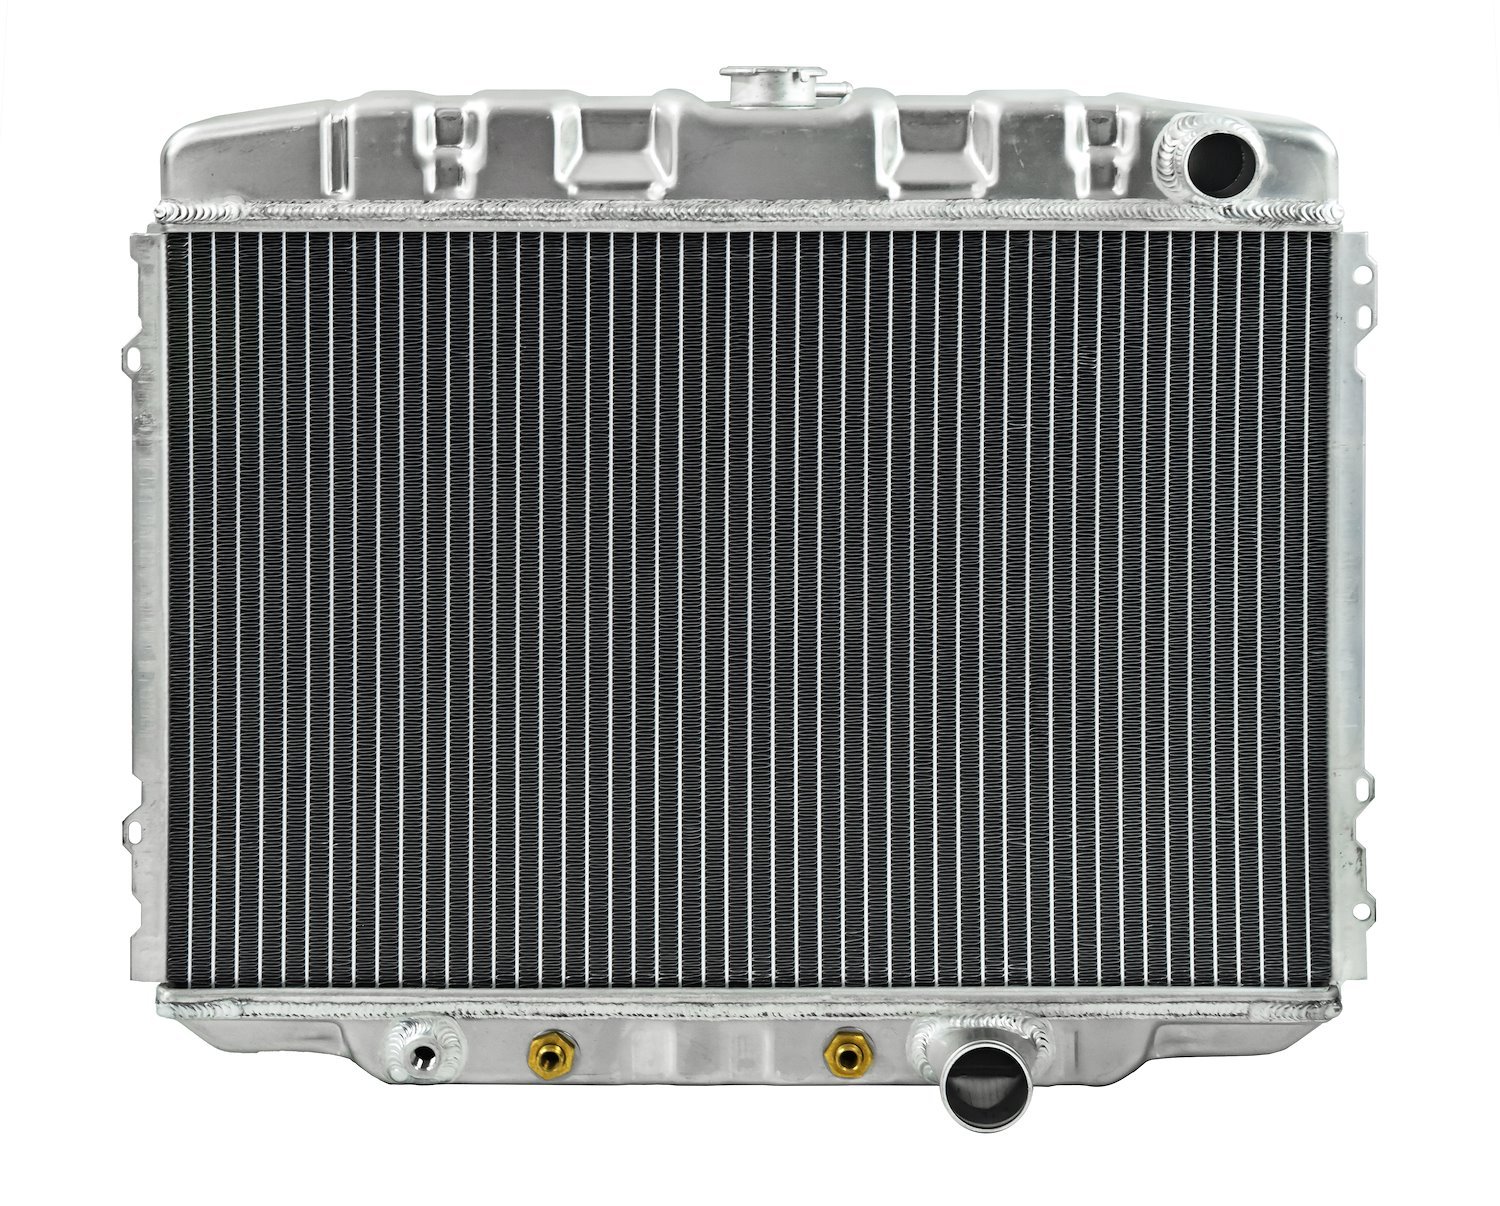 Reproduction Aluminum Radiator for 1967-1970 Ford Mustang w/